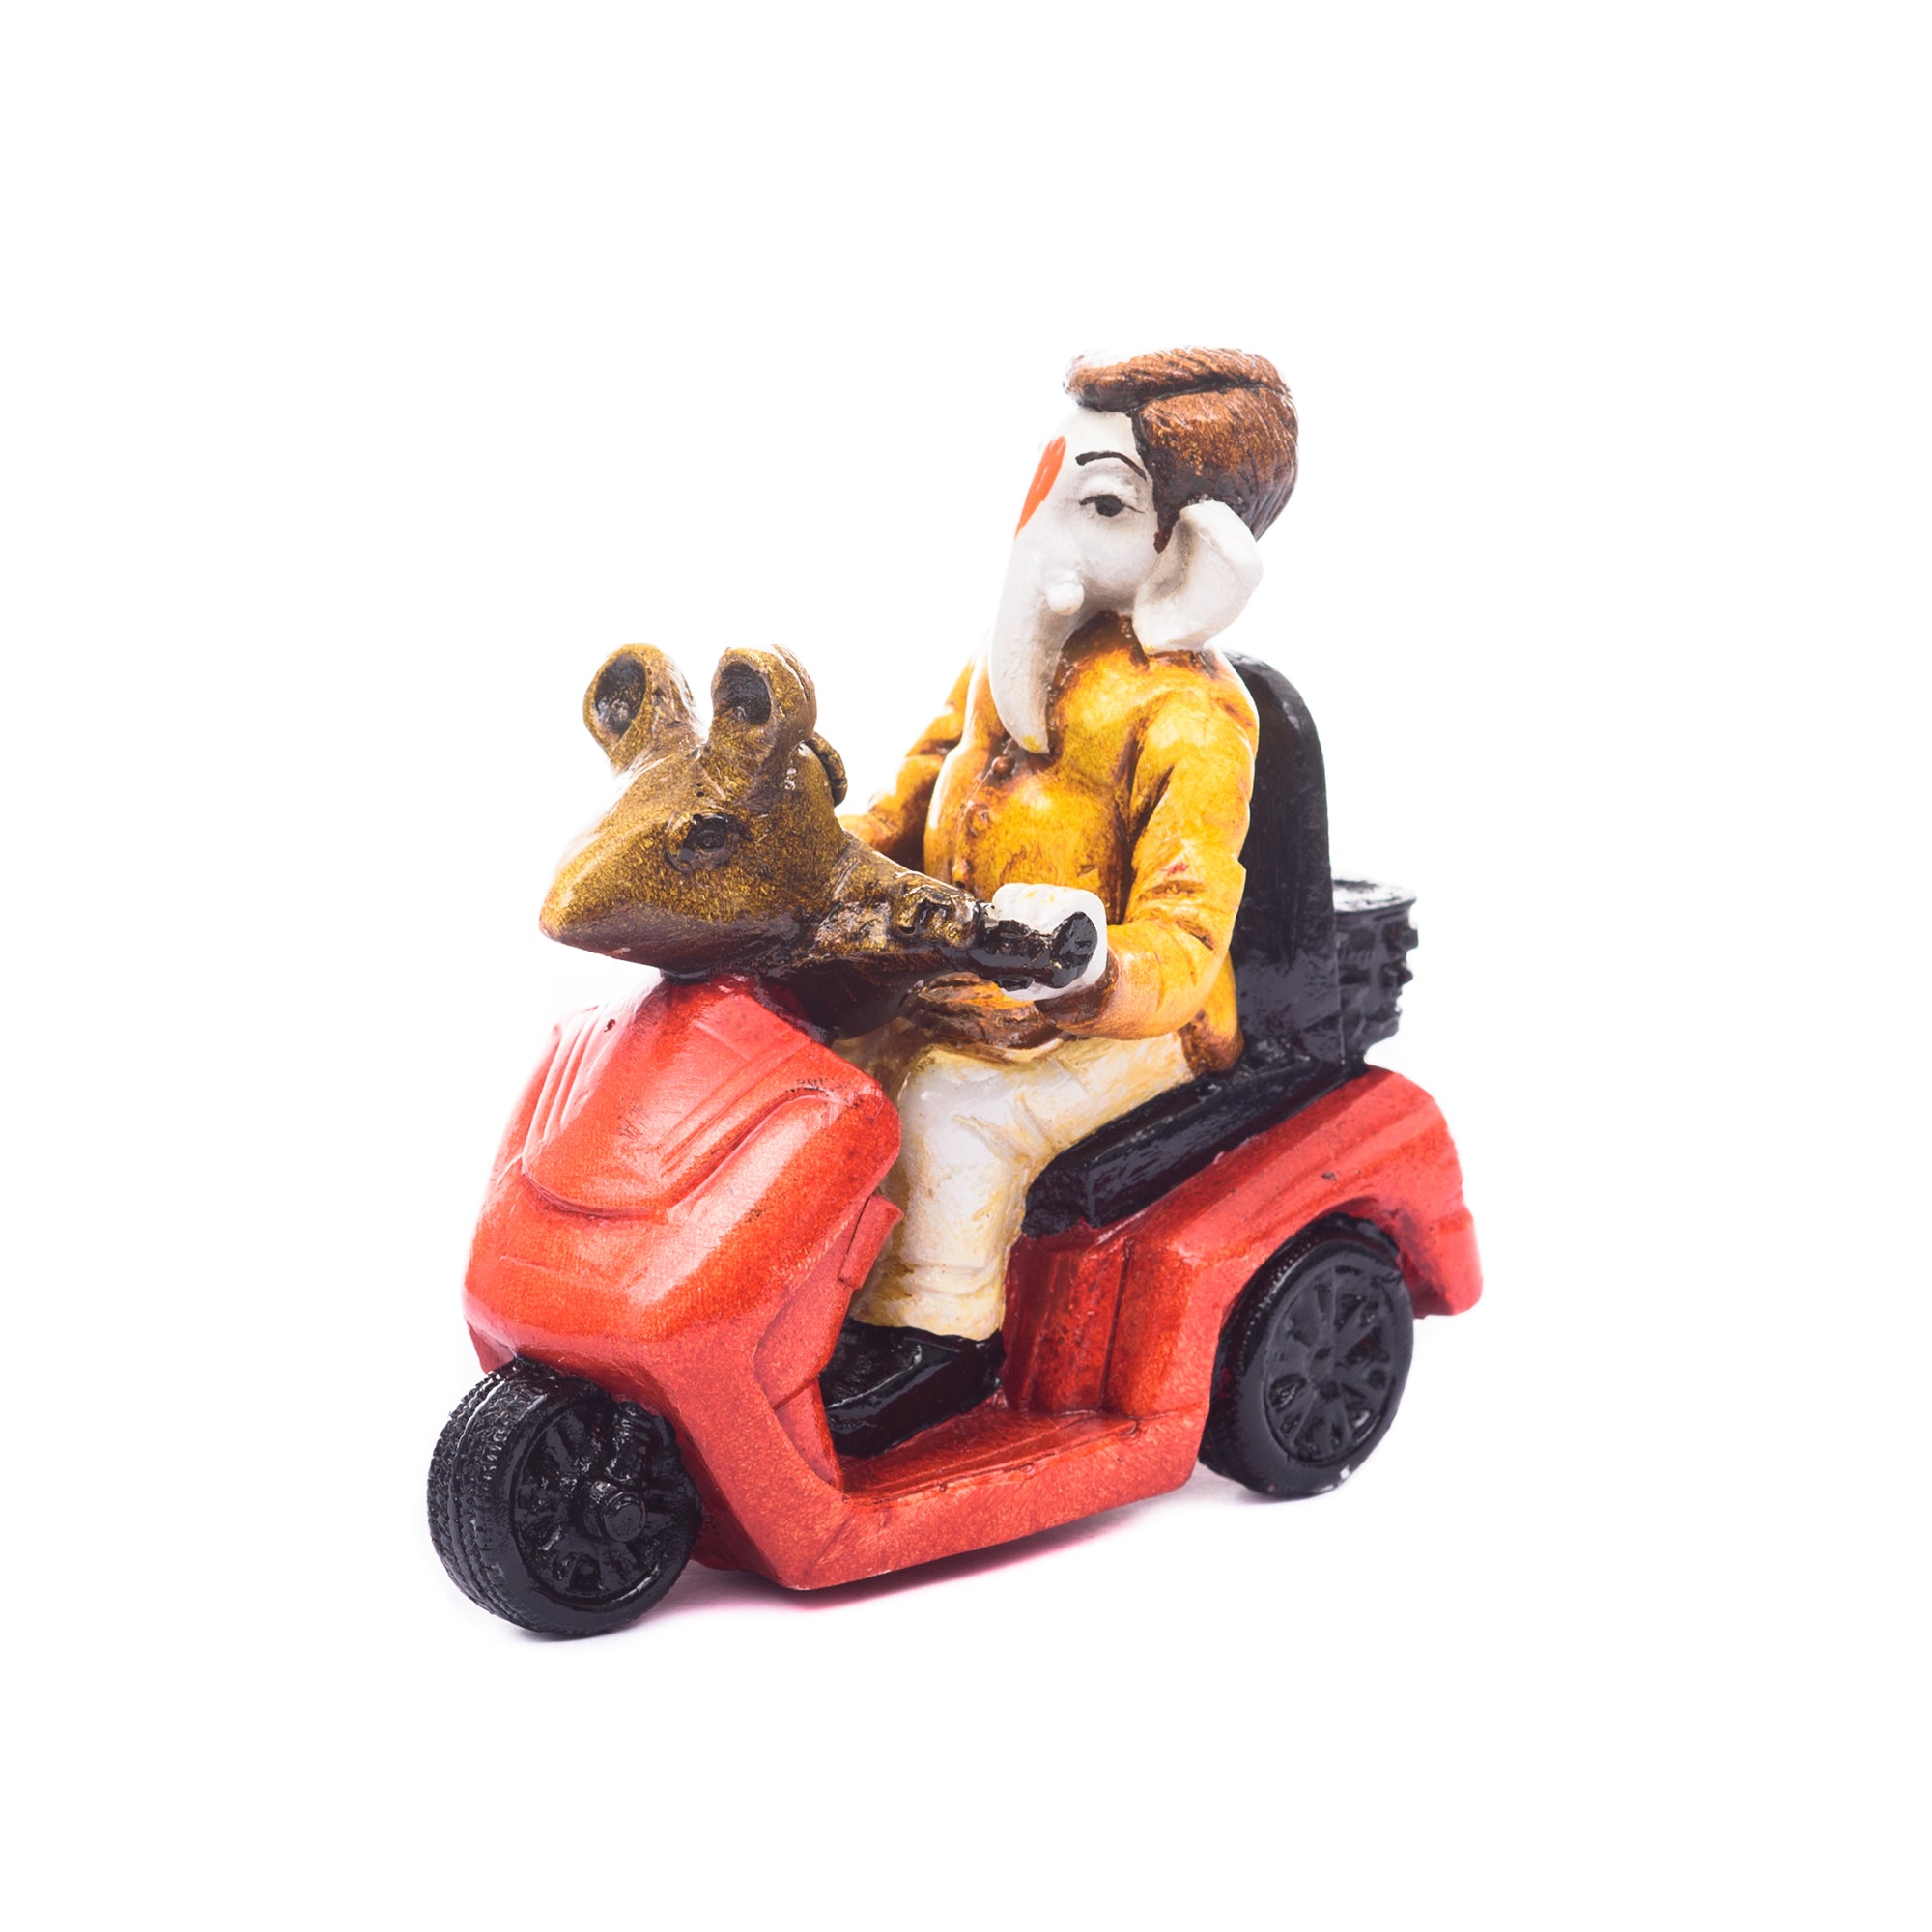 Polyresin Lord Ganesha Idol riding Scooter (Red and Yellow) 1